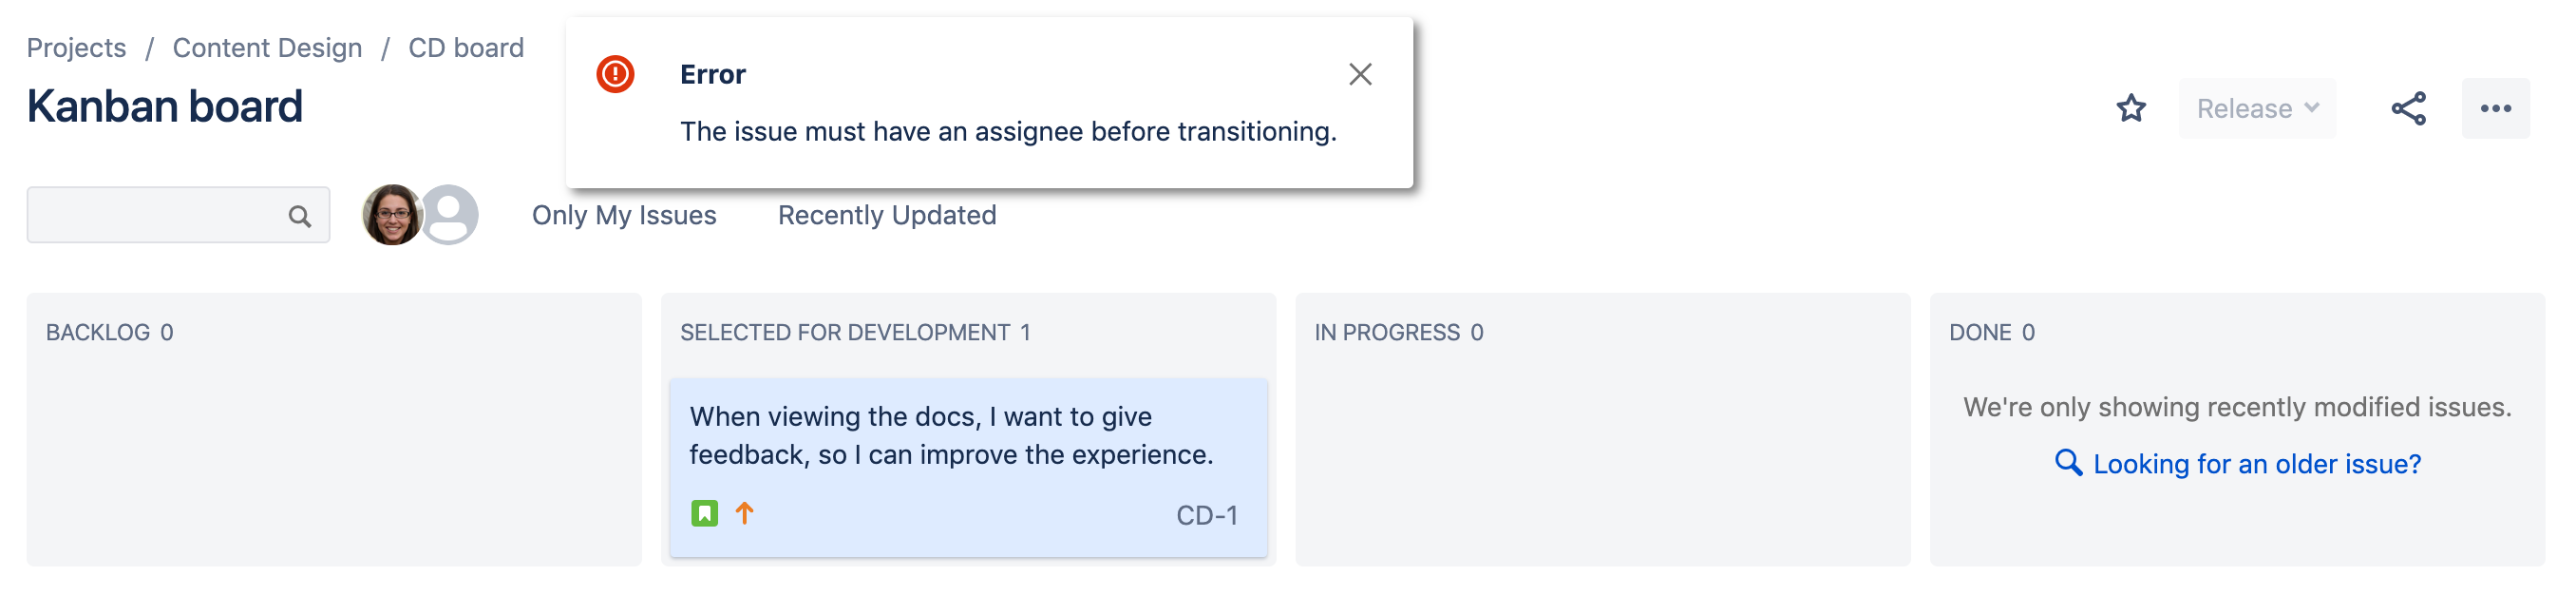 Jira board showing a notification message "The issue must have an assignee before transitioning."